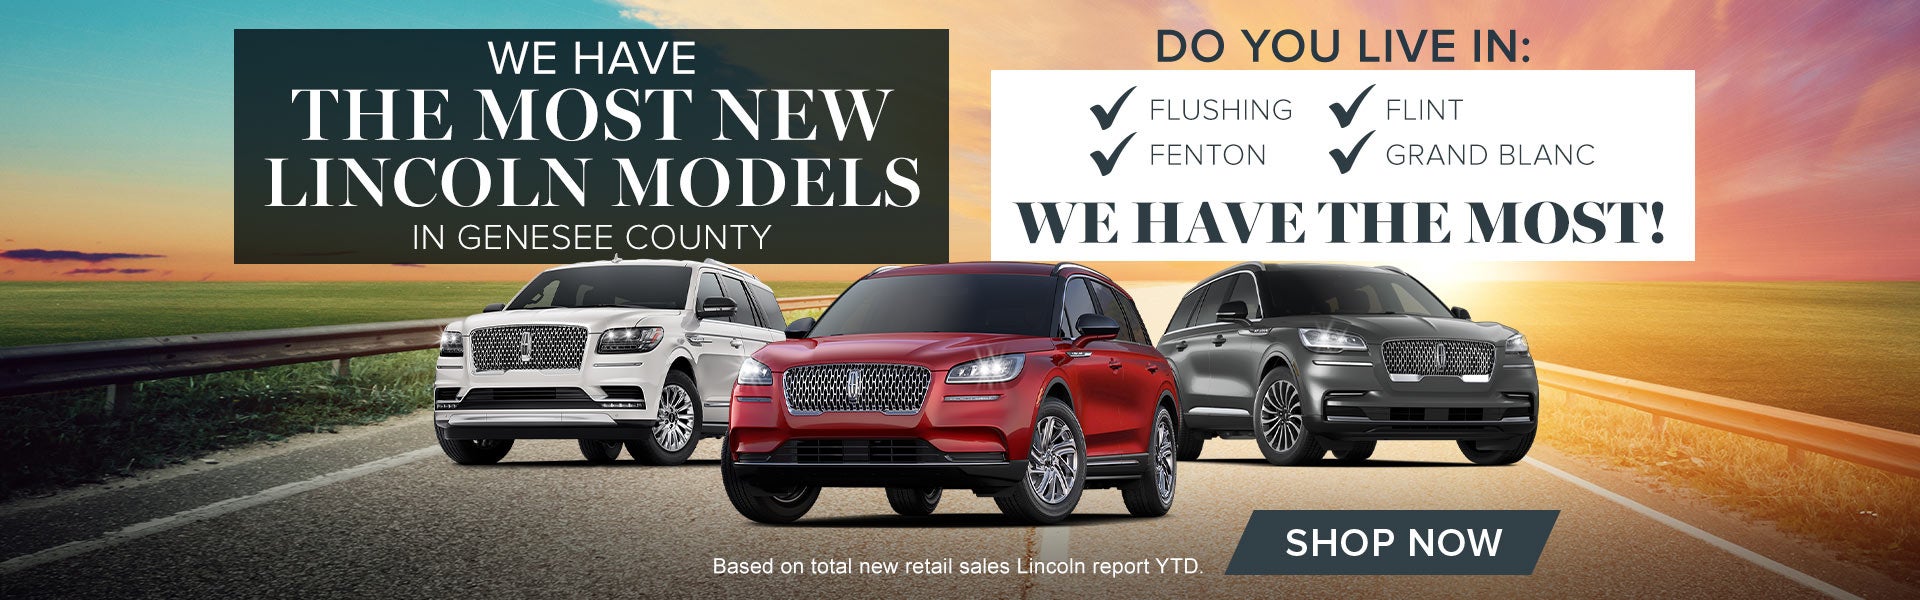 The Most New Lincoln Models